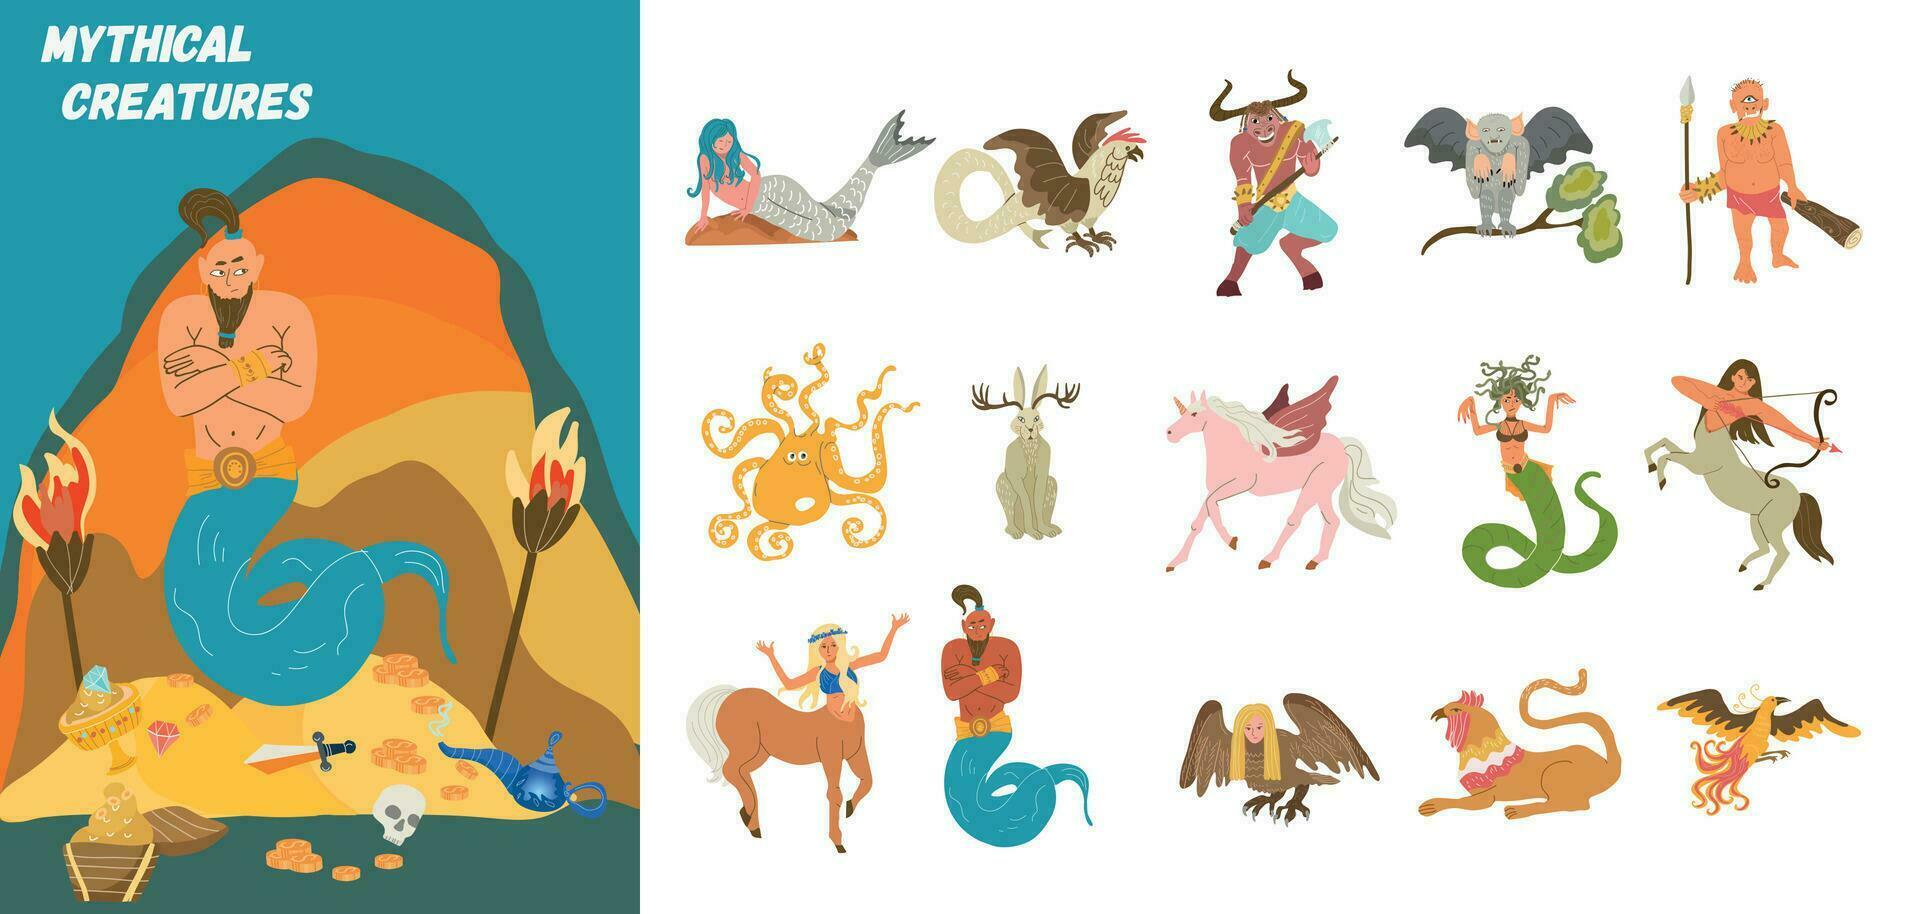 Mythical Creatures Flat Set vector